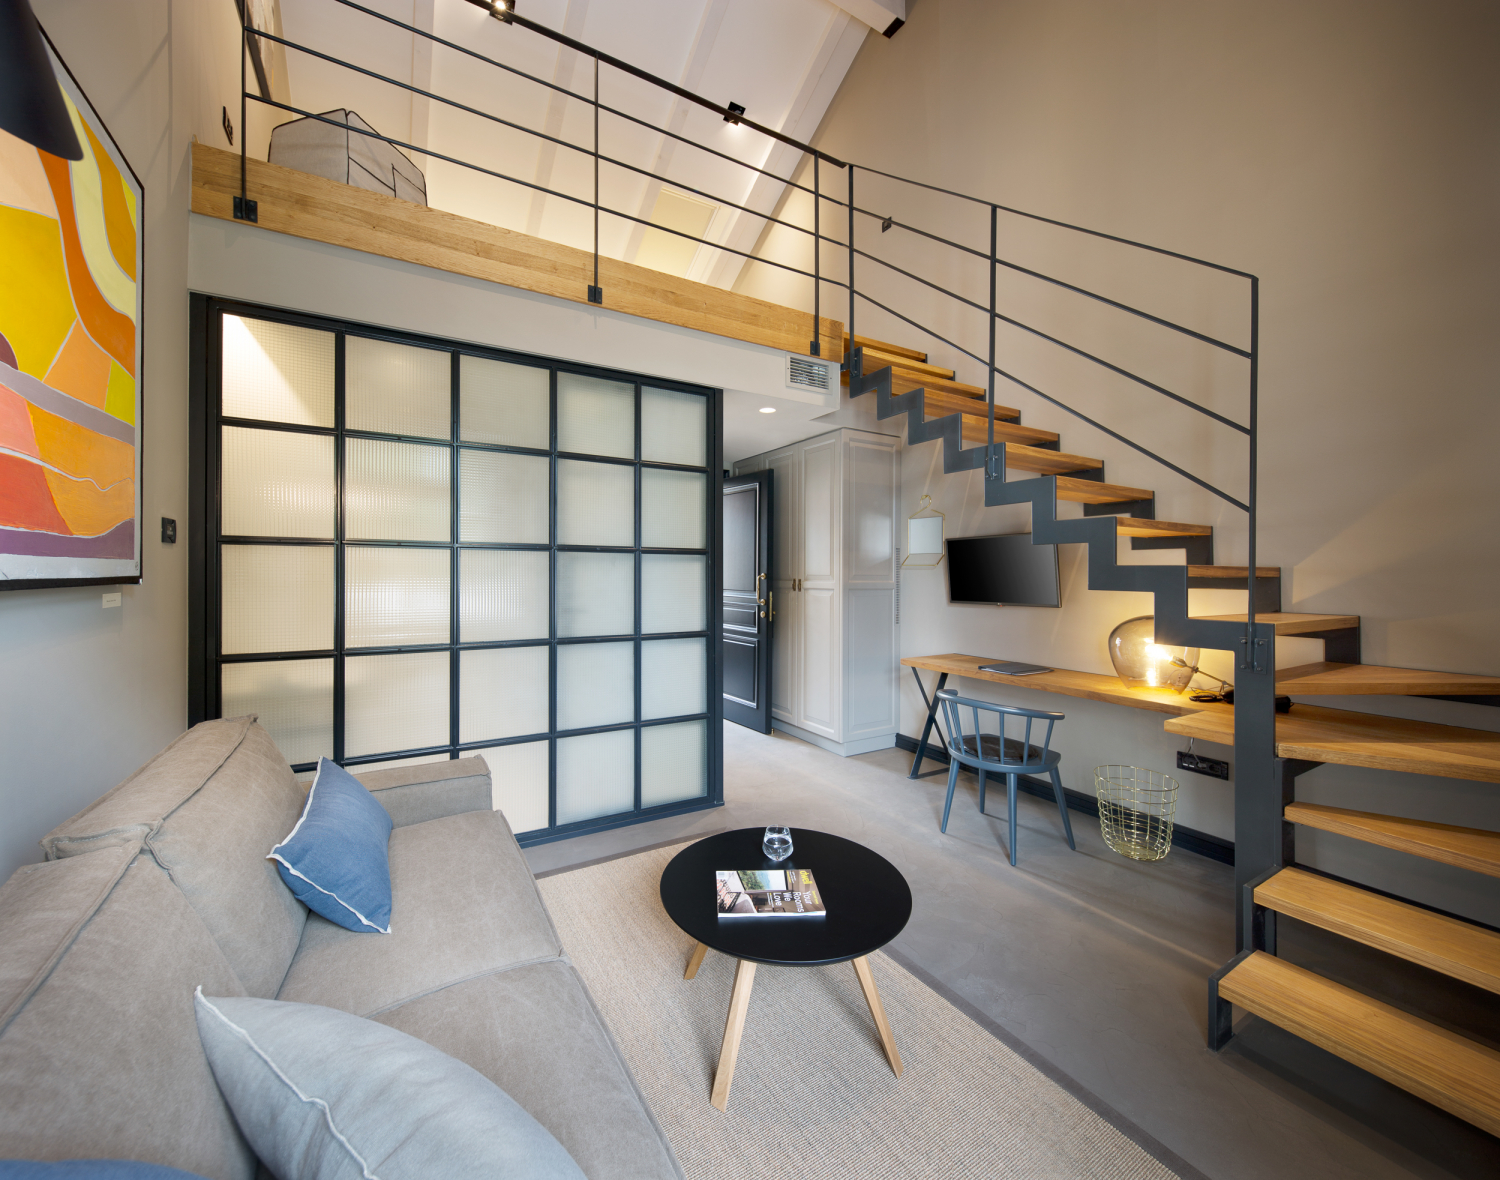 A room with a grey sofa and a wood and steel staircase leading up to a second mezzanine level